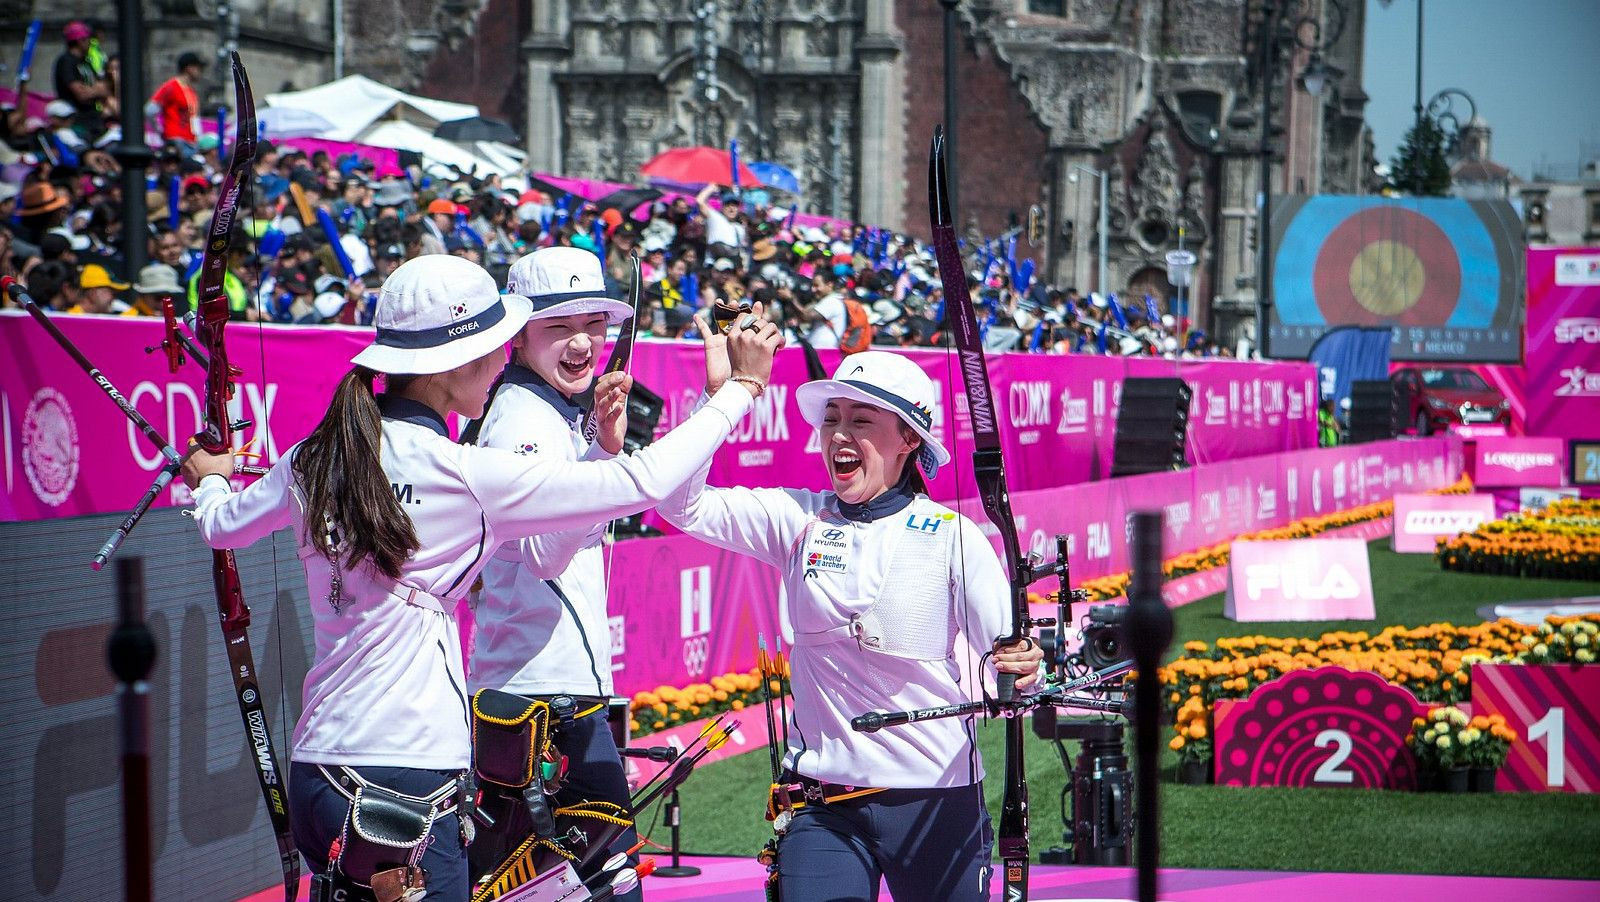 South Korea won the women's recurve team event at the World Championships in Mexico City ©World Archery